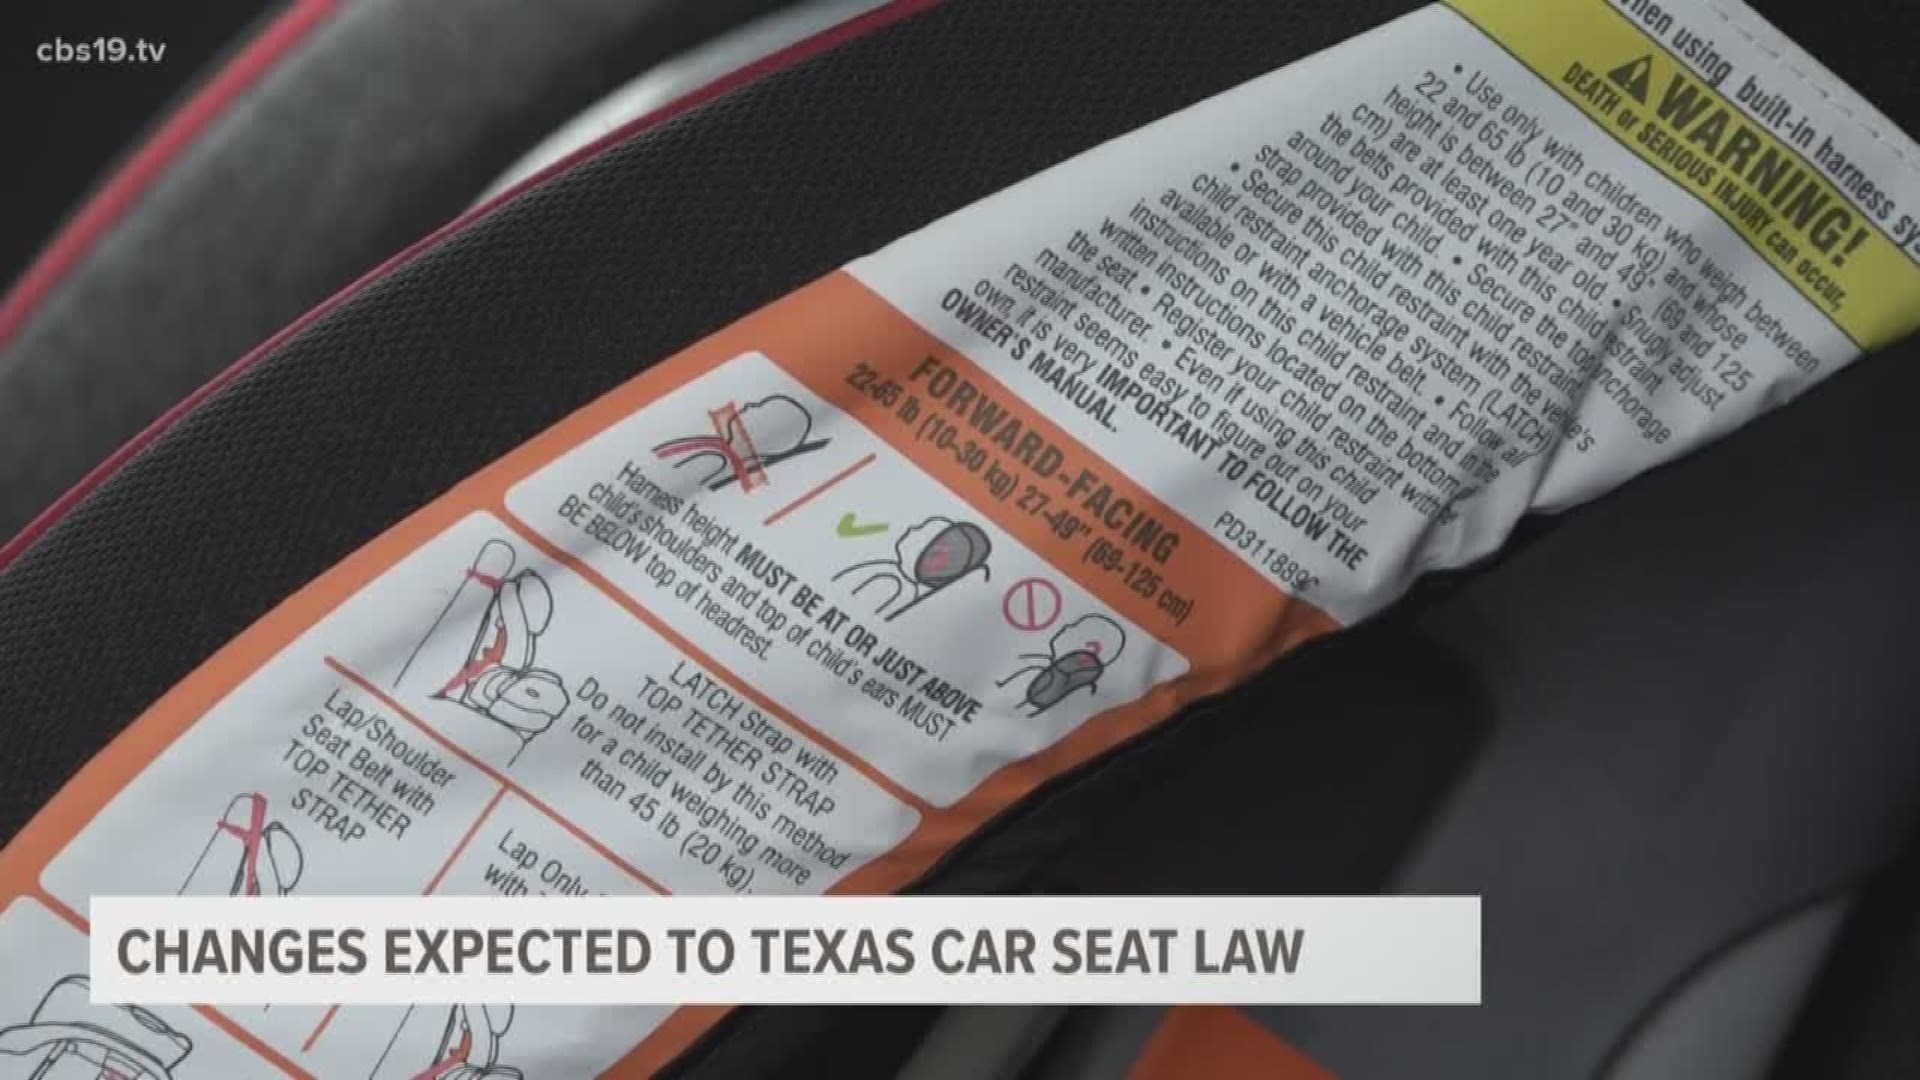 Texas House Bill Updating Car Seat Law Following Safety Concerns Cbs19 Tv